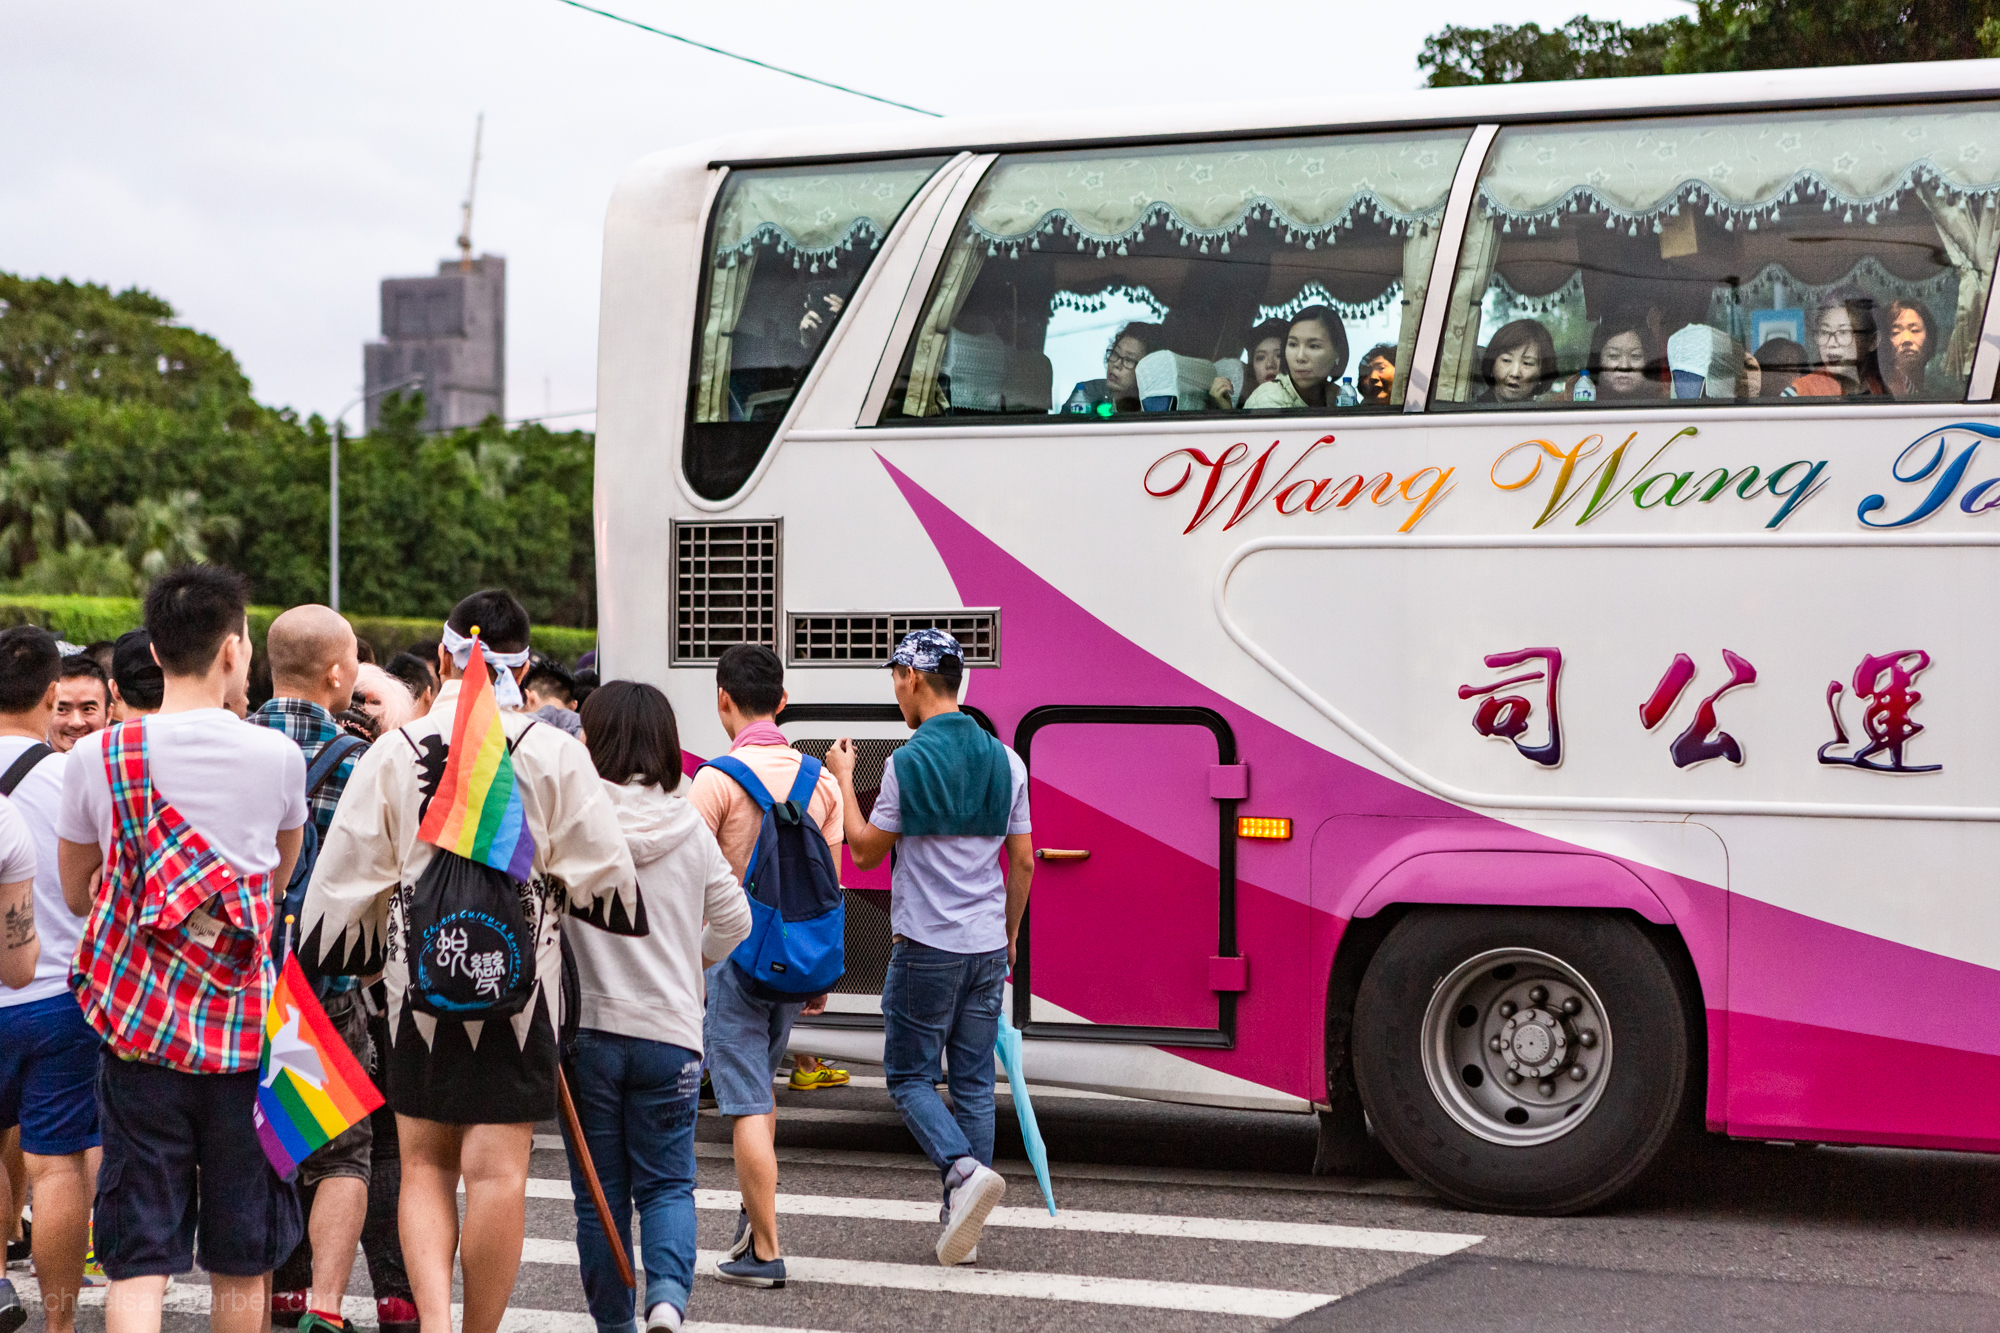 A tour group from The People's Republic of China gawks in amazement at a crowd of tens of thousands of LGBT marchers, Taiwan Pride,2015